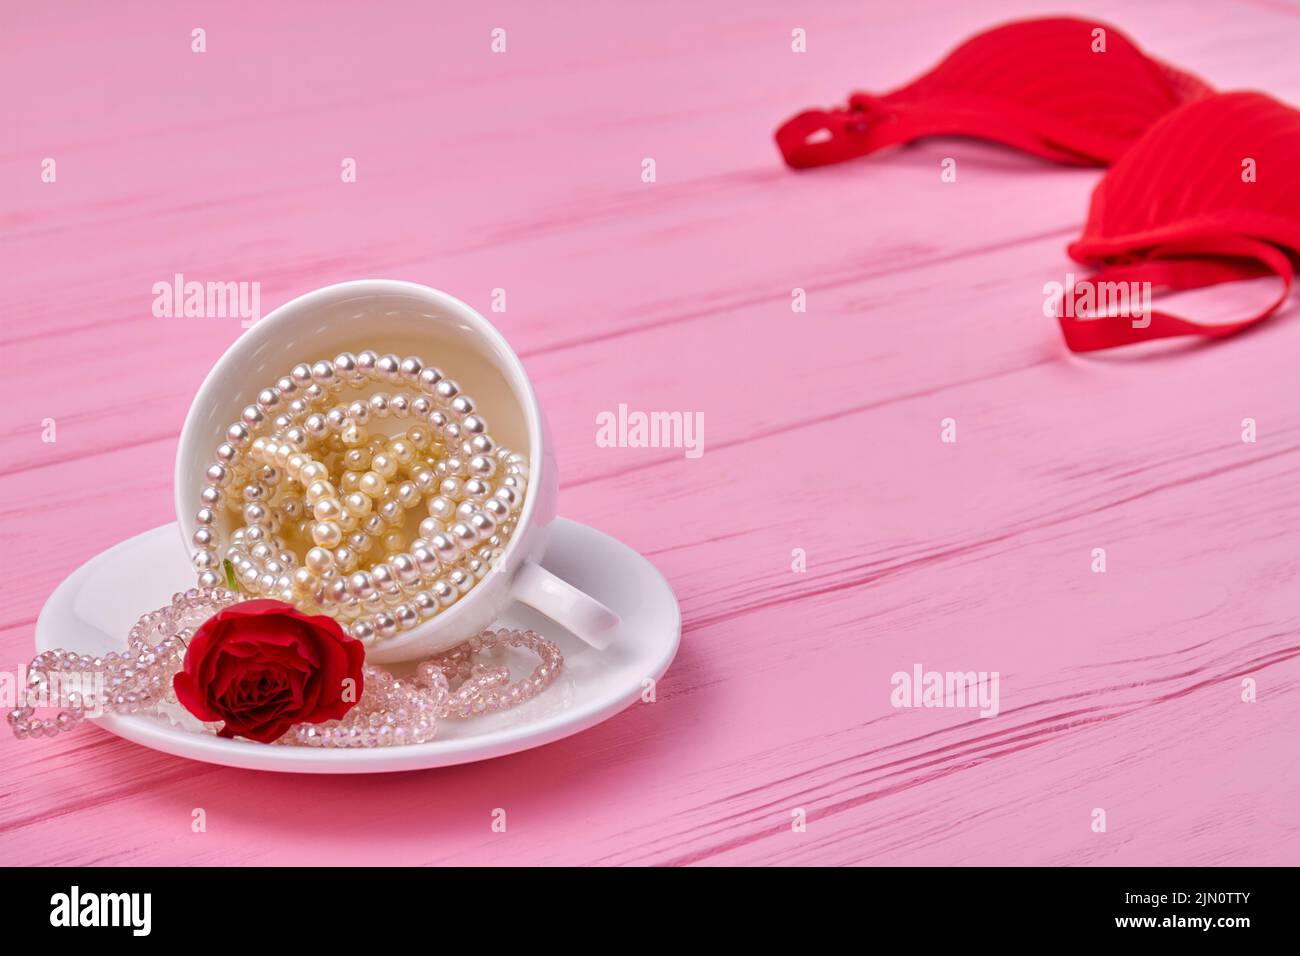 White teacup full of pearl necklaces with red flower. Pink wooden desk. Stock Photo